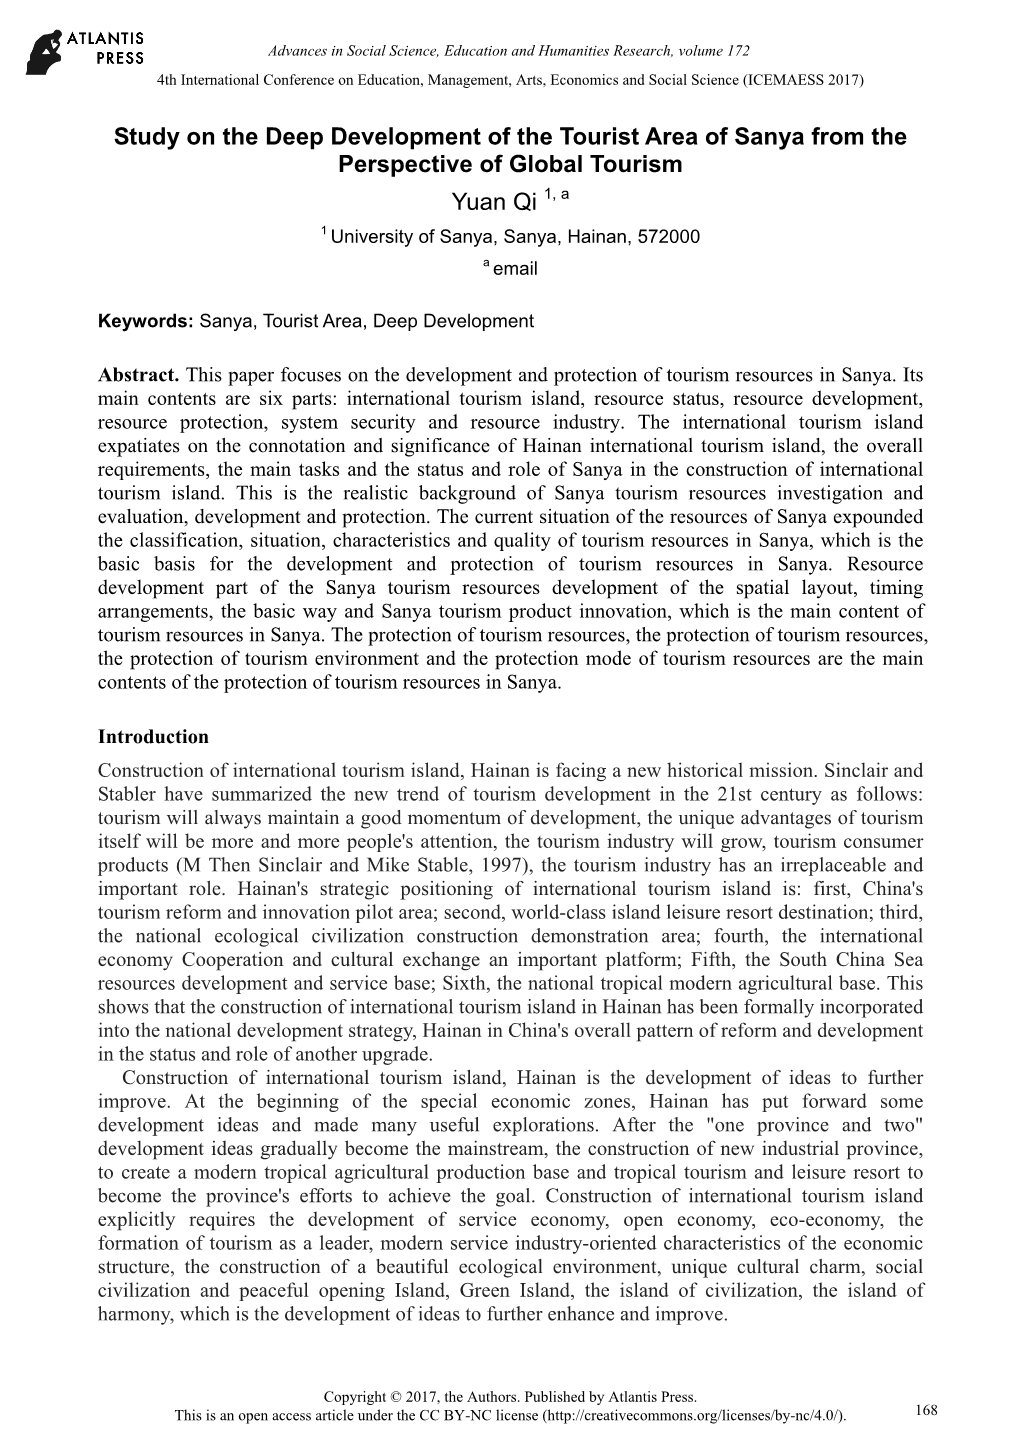 Study on the Deep Development of the Tourist Area of Sanya from the Perspective of Global Tourism Yuan Qi 1, a 1 University of Sanya, Sanya, Hainan, 572000 a Email